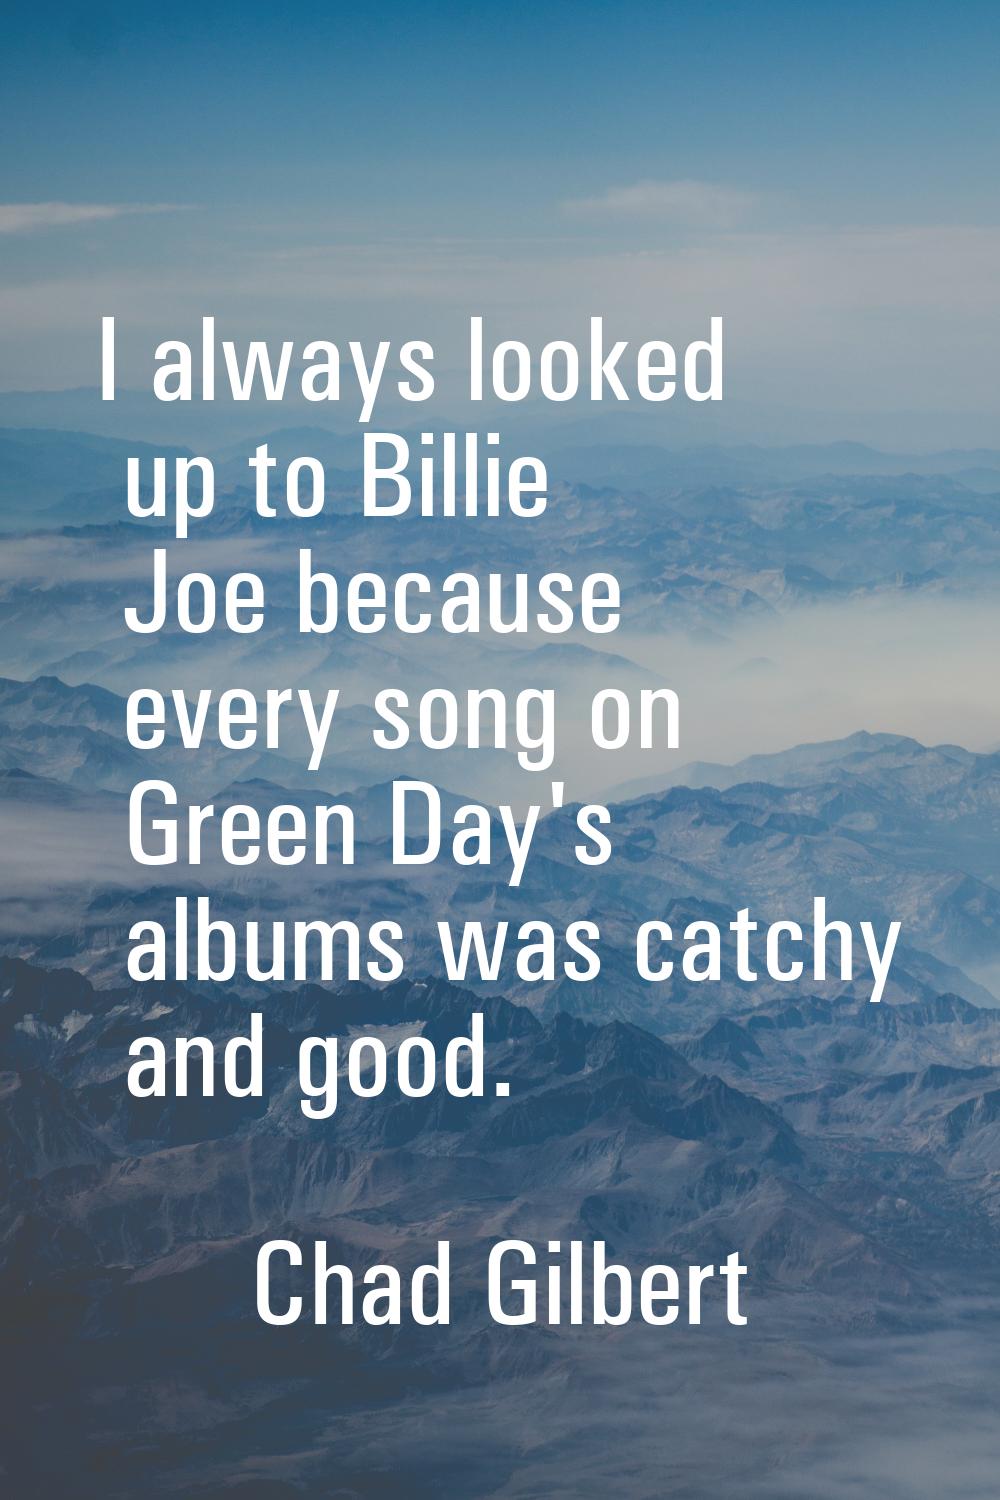 I always looked up to Billie Joe because every song on Green Day's albums was catchy and good.